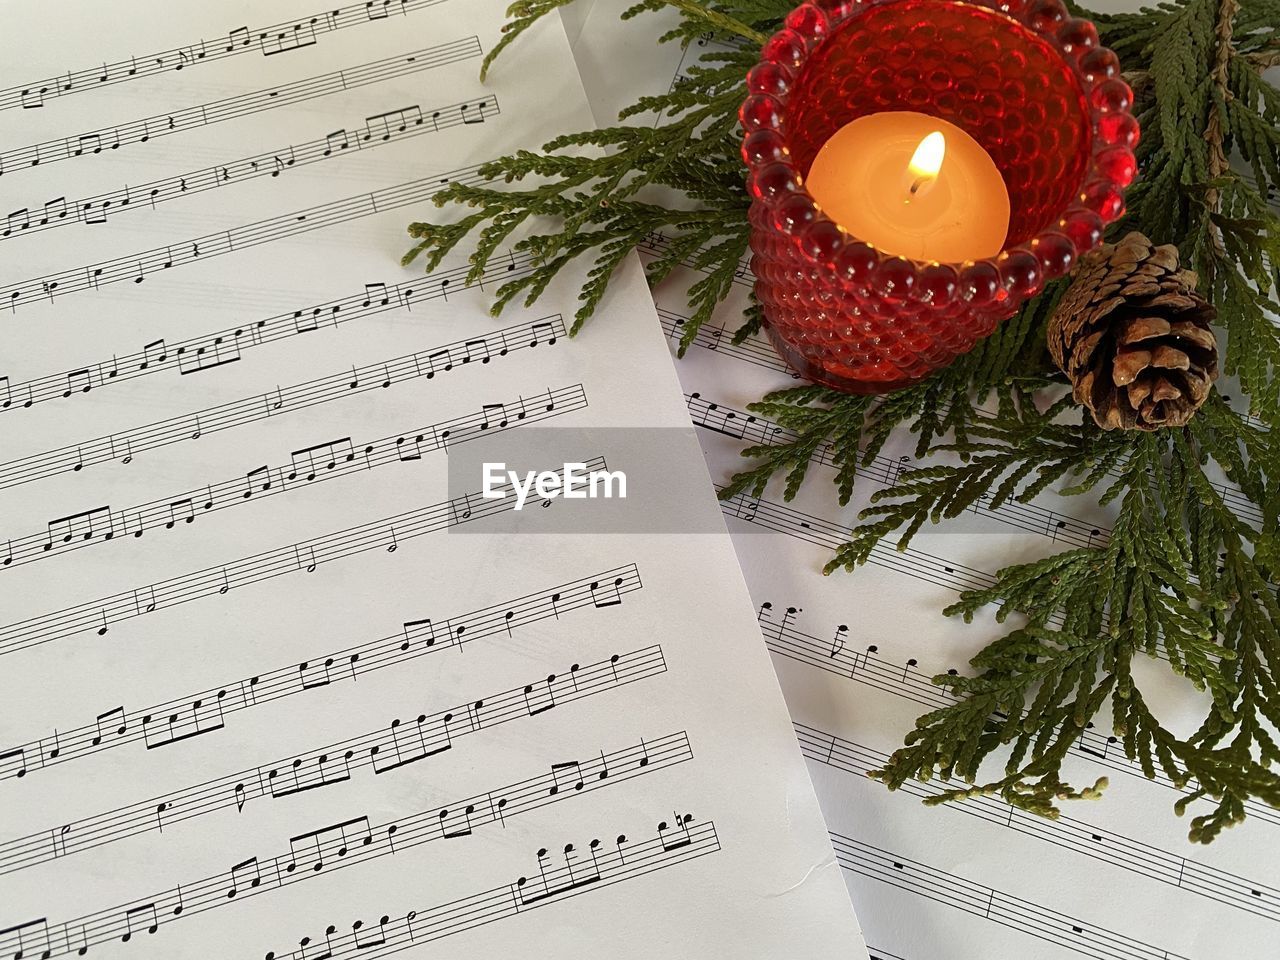 Sheet music with evergreens and candle